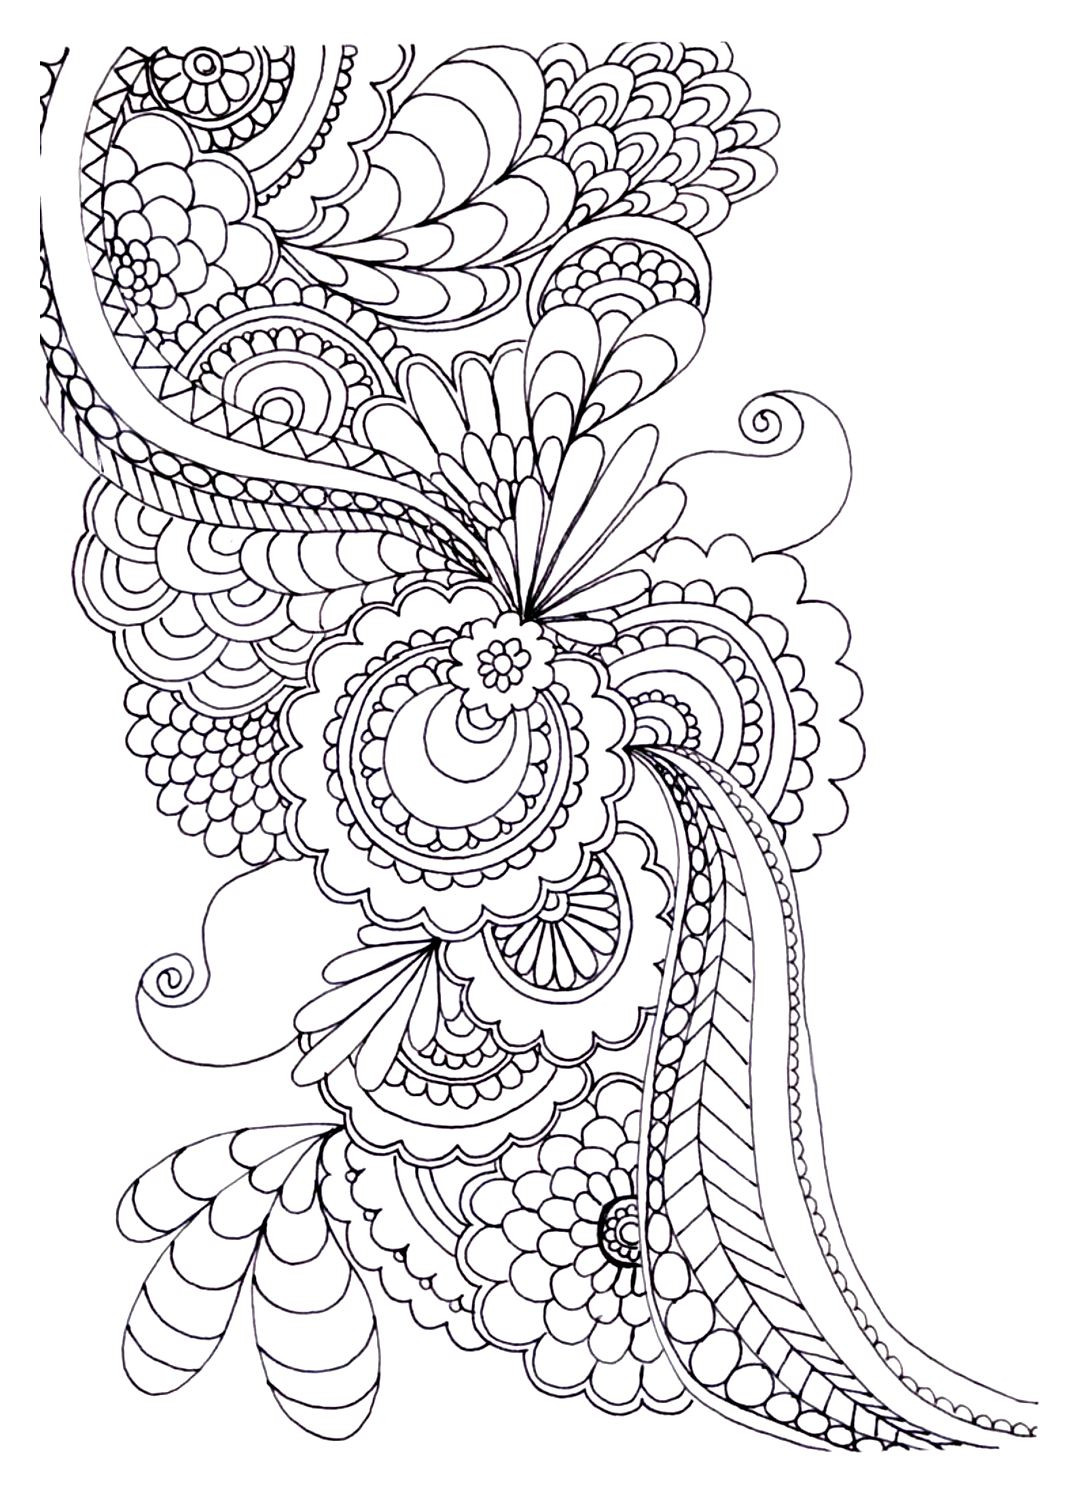 Adult Printable Coloring Pages
 20 Free Adult Colouring Pages The Organised Housewife